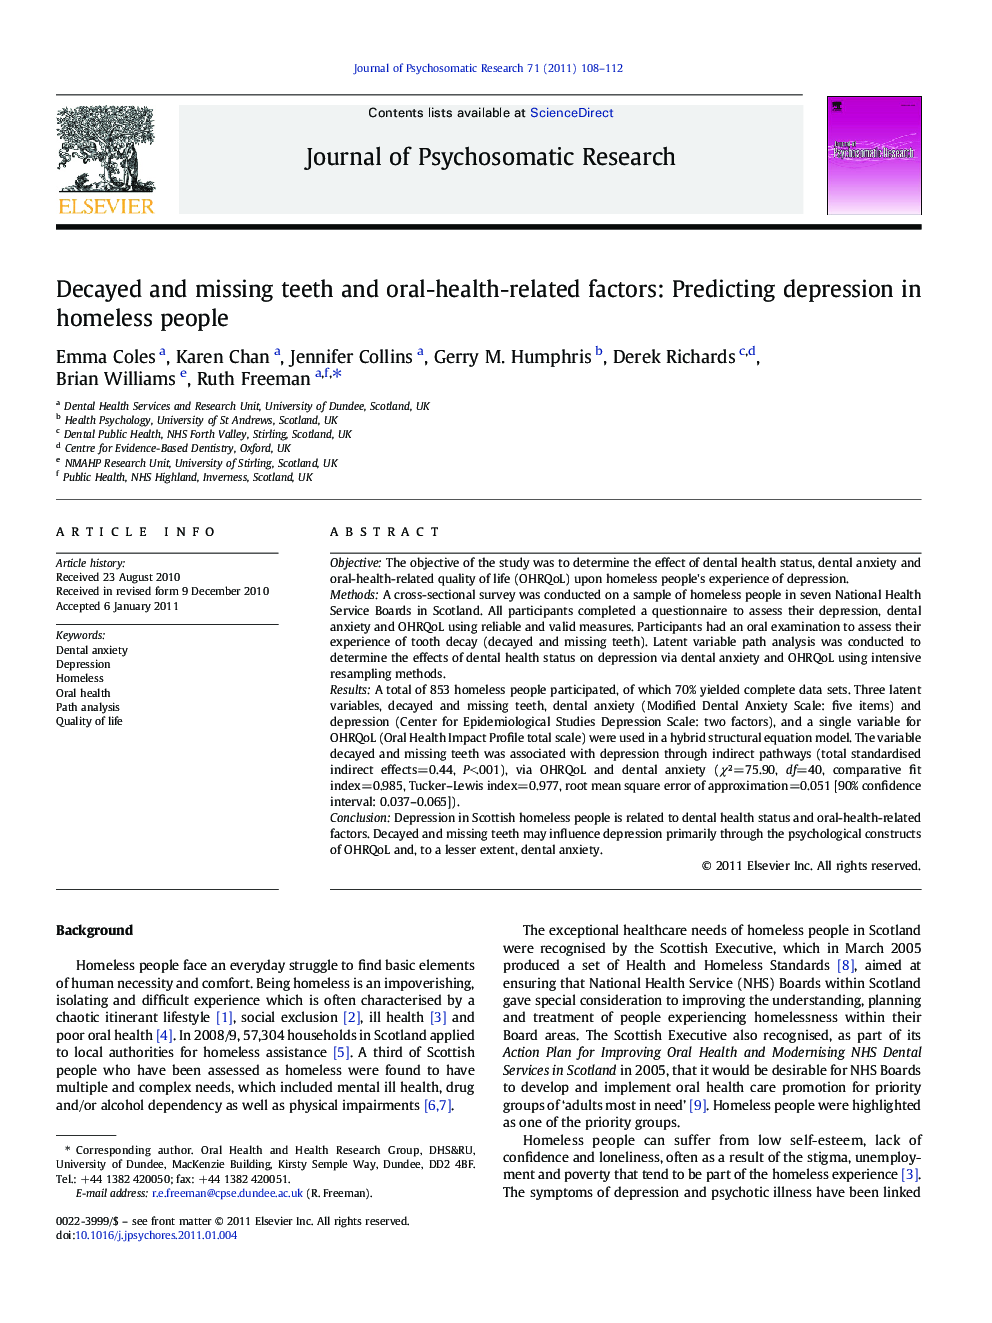 Decayed and missing teeth and oral-health-related factors: Predicting depression in homeless people